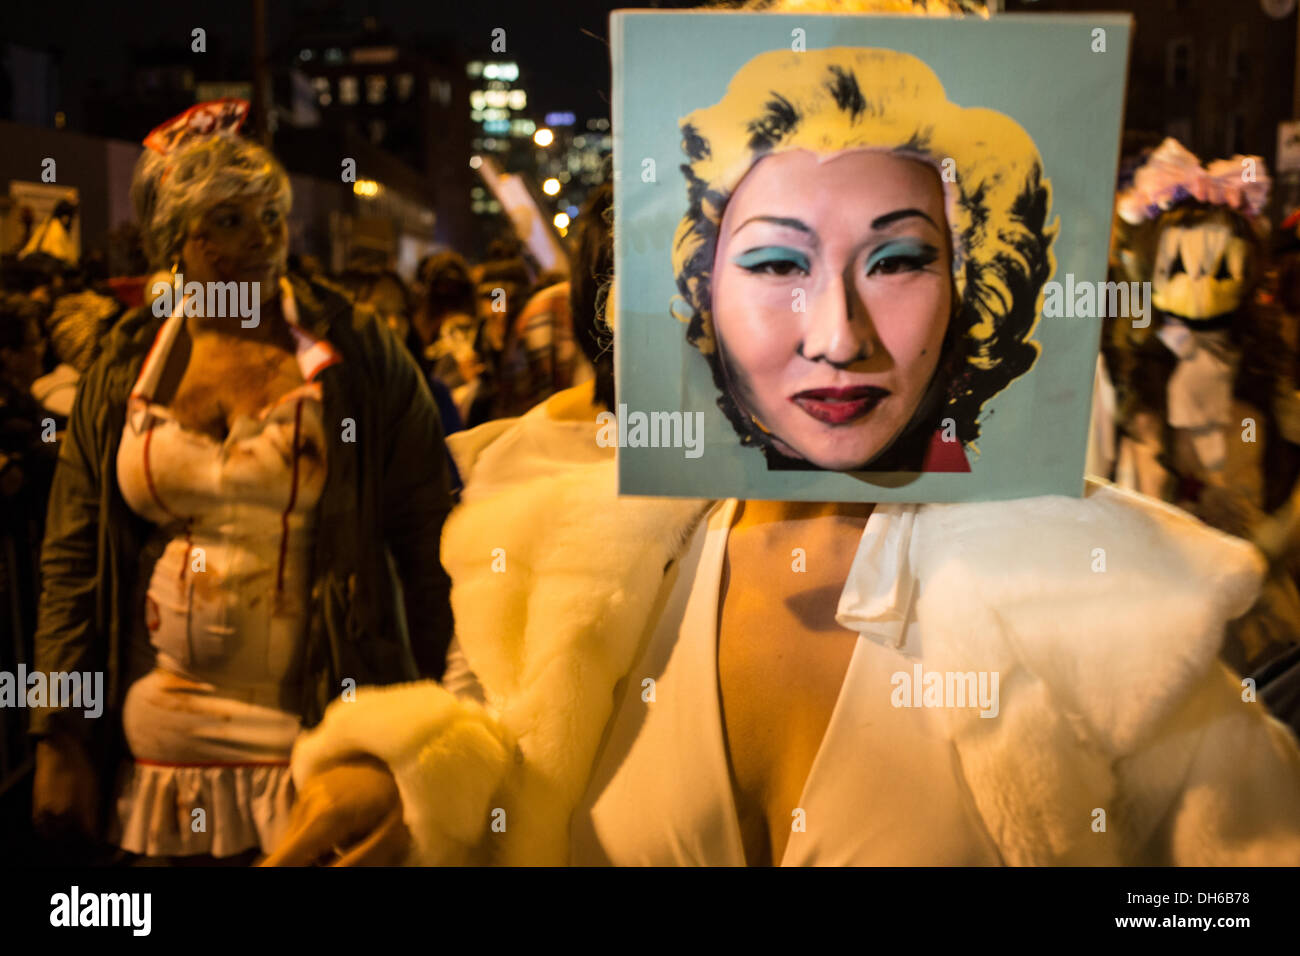 New York, NY, 31 October 2013.A woman of Asian descent wears a replica of an Andy Warhol portrait of Marilyn Monroe with her actual face replacing Monroe's face in the Greenwich Village Halloween Parade. 2013 is the 40th anniversary of the parade, which was cancelled in 2012 because of hurricane Sandy. Credit:  Ed Lefkowicz/Alamy Live News Stock Photo